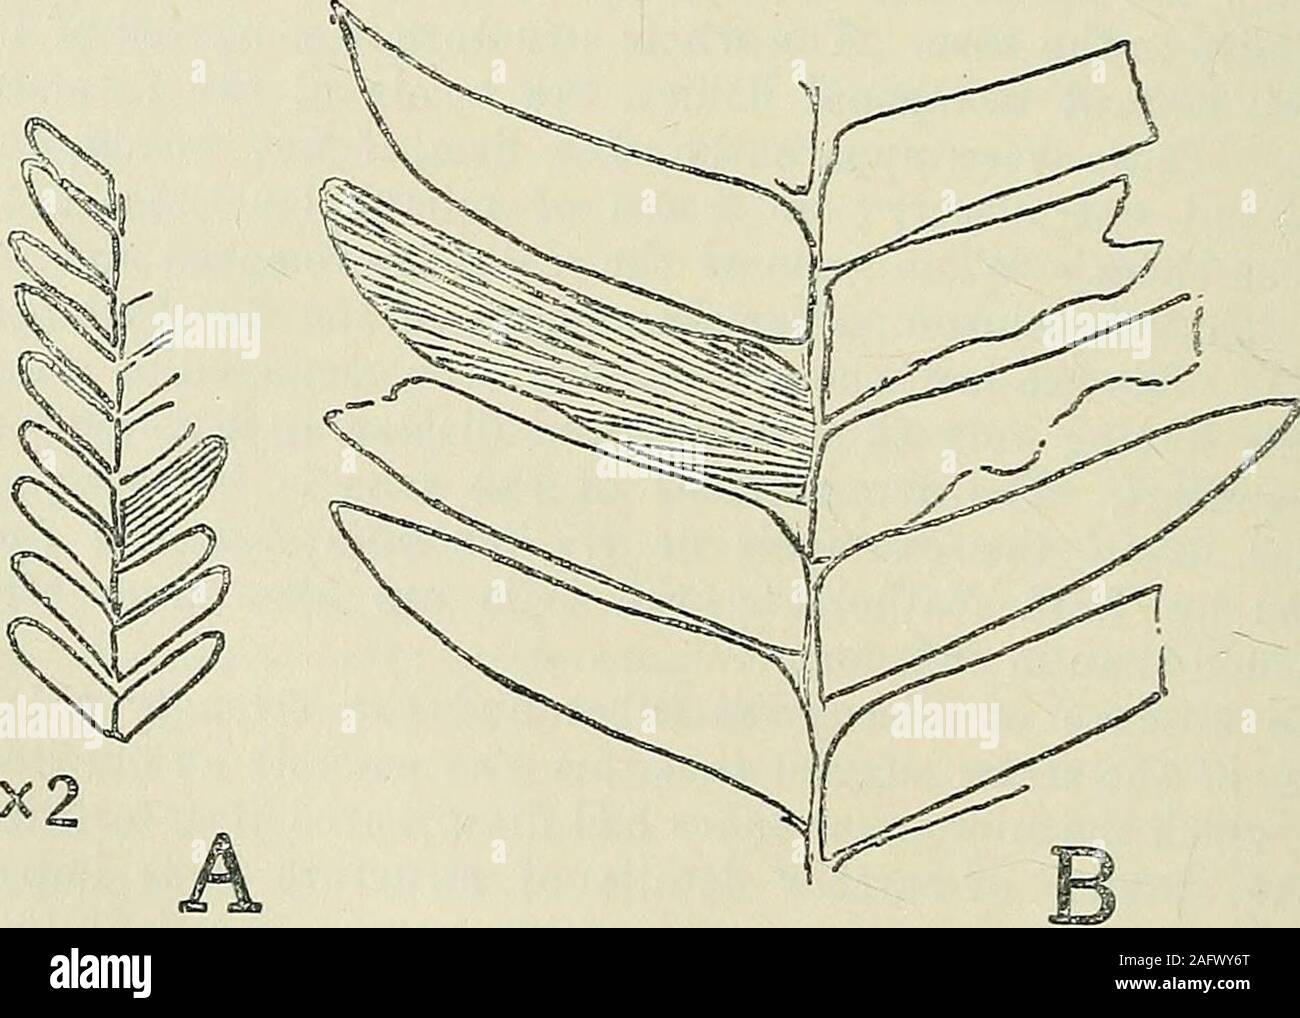 . The Quarterly journal of the Geological Society of London. set. The pinna? arelanceolate in shape, with entire margins tapering gradually to anacuminate apex. Their bases are rounded, and they are attachedto the rachis by the central portion of the base, which is slightlyconcave in form at the point of insertion. The pinnae are traversedby a number of fine parallel veins. One of the specimens is part of a larger frond, with pinnae8 to 9 cm. long and attaining a width of about 13 mm.; the othermore complete example has much smaller pinnae, only 2 cm. longand 5 mm. wide. The characters of both Stock Photo